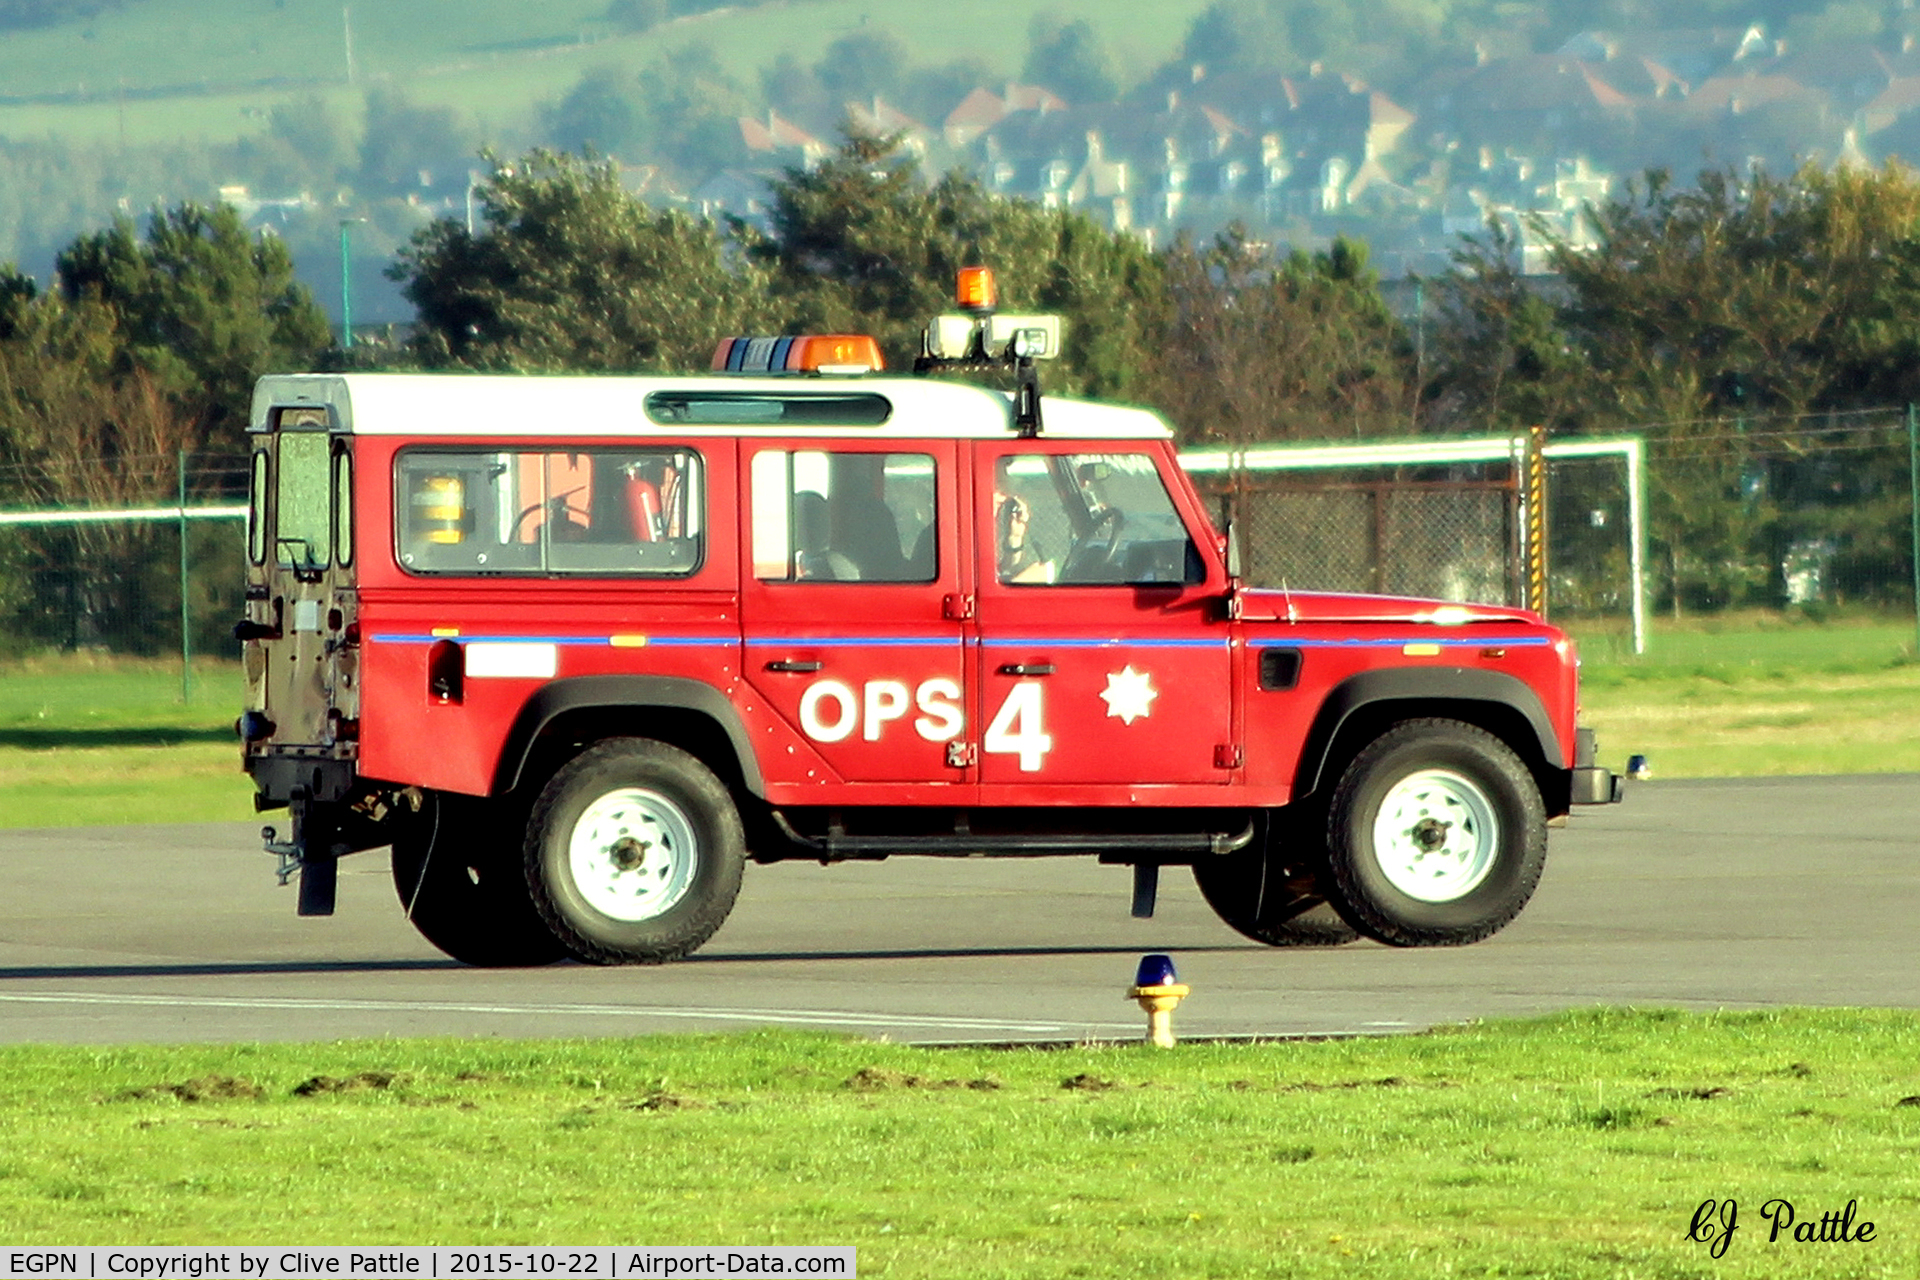 Dundee Airport, Dundee, Scotland United Kingdom (EGPN) - Airfield Operations vehicle at Dundee Riverside EGPN